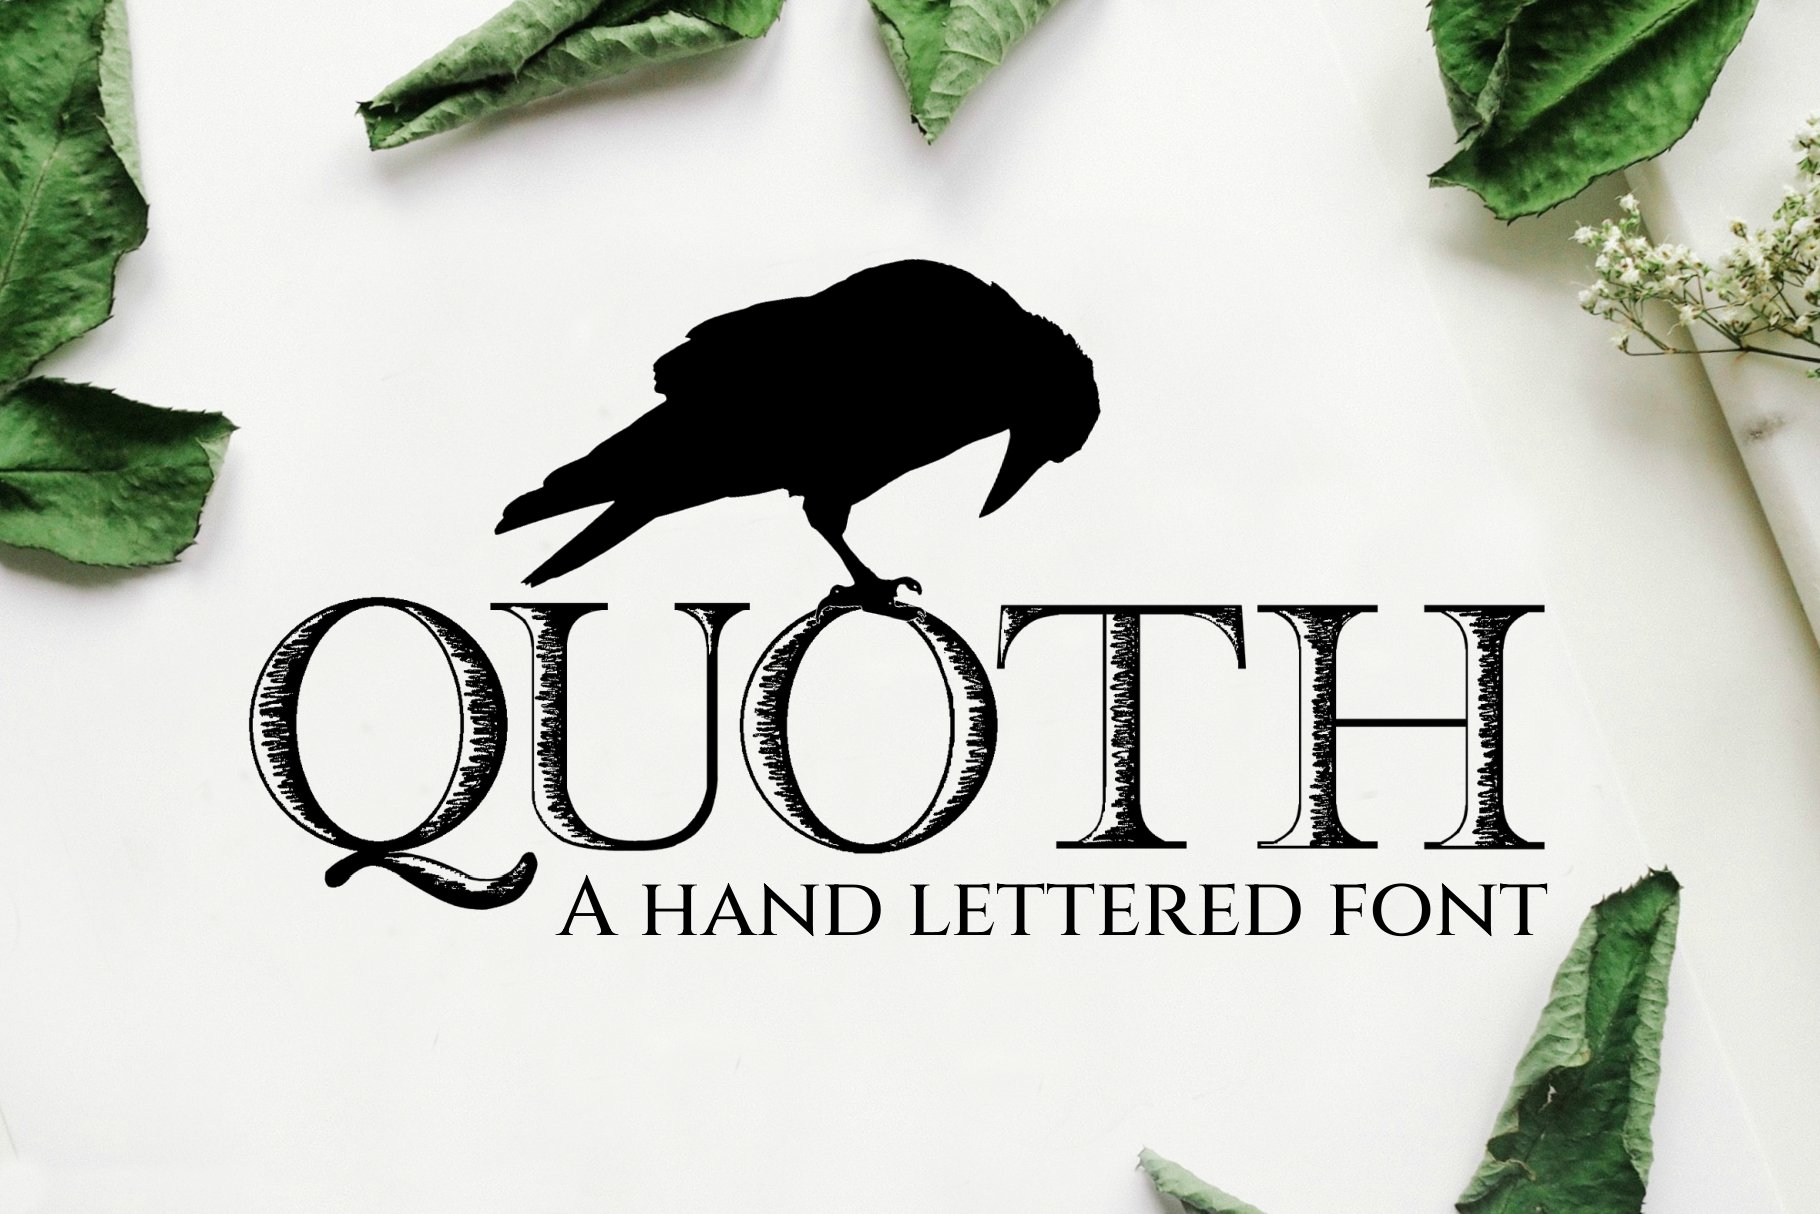 Quoth Font cover image.